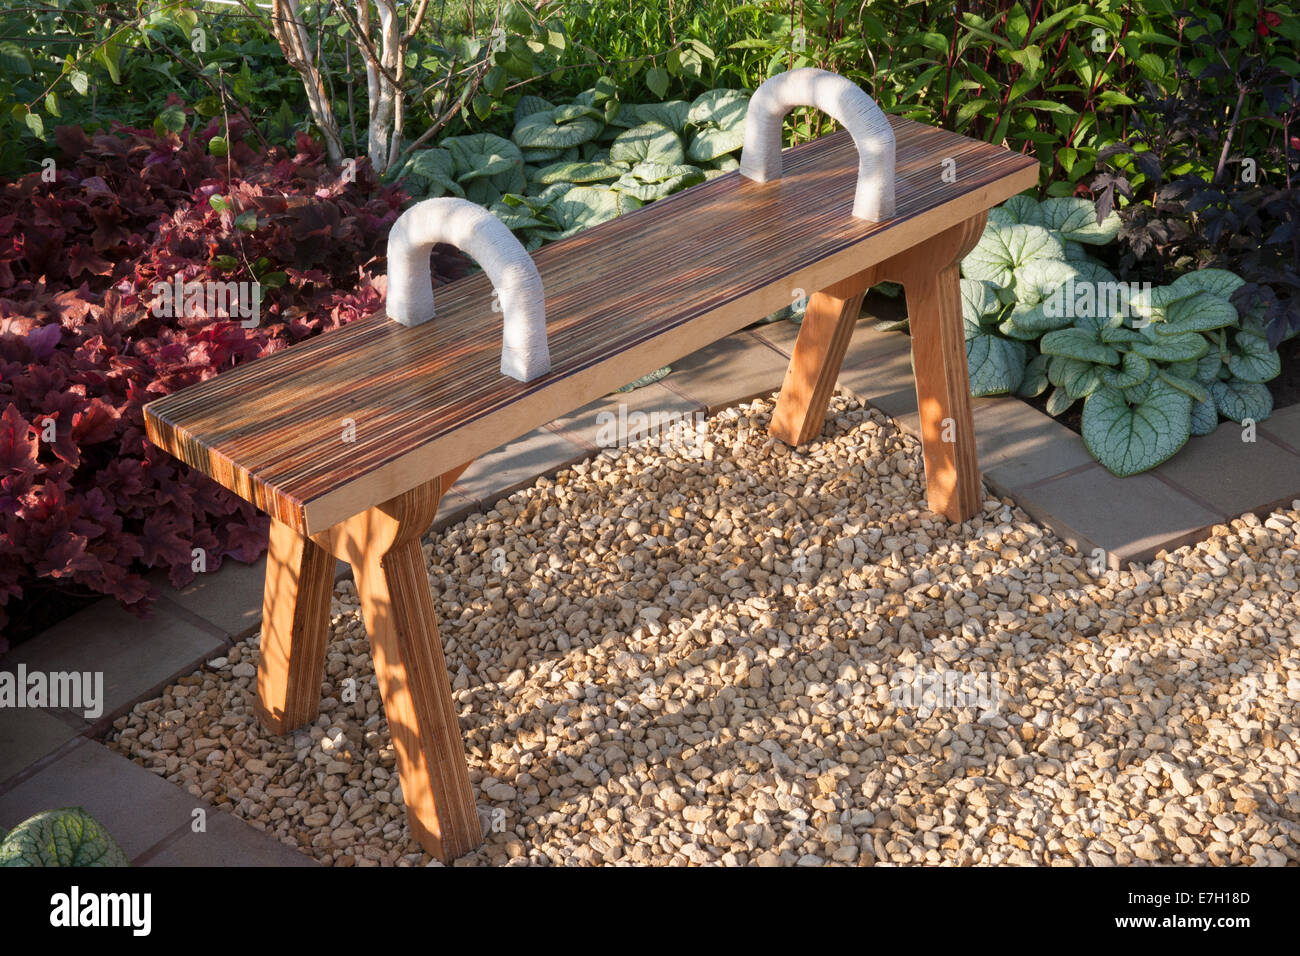 Garden with a wooden bench seat seating area on a gravel patio UK summer Stock Photo